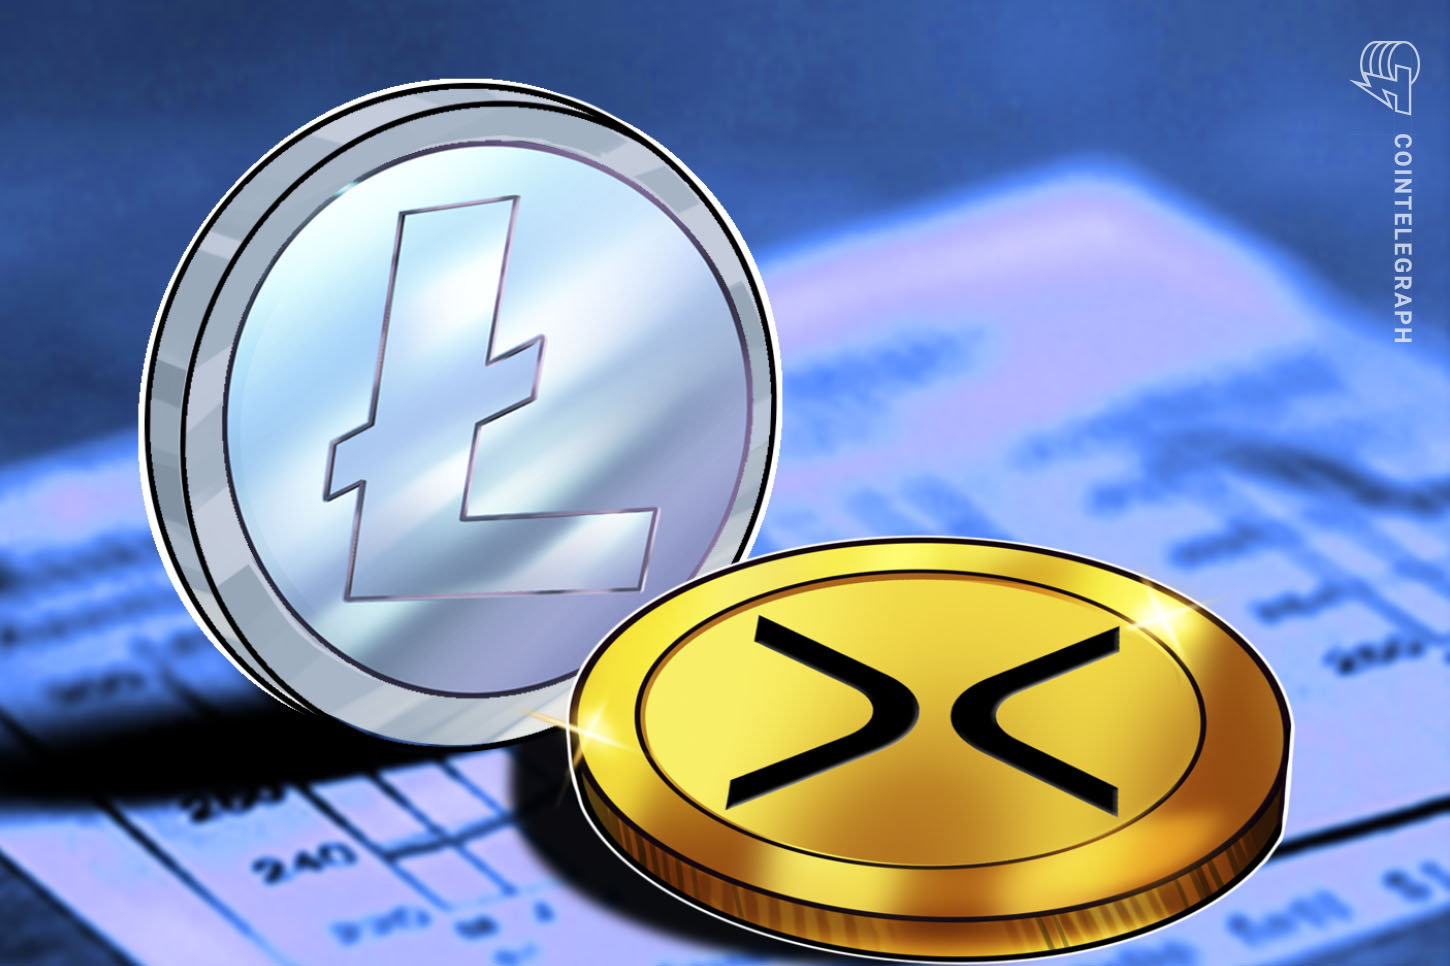 XRP sinks under LTC once more after new lawsuit from main investor